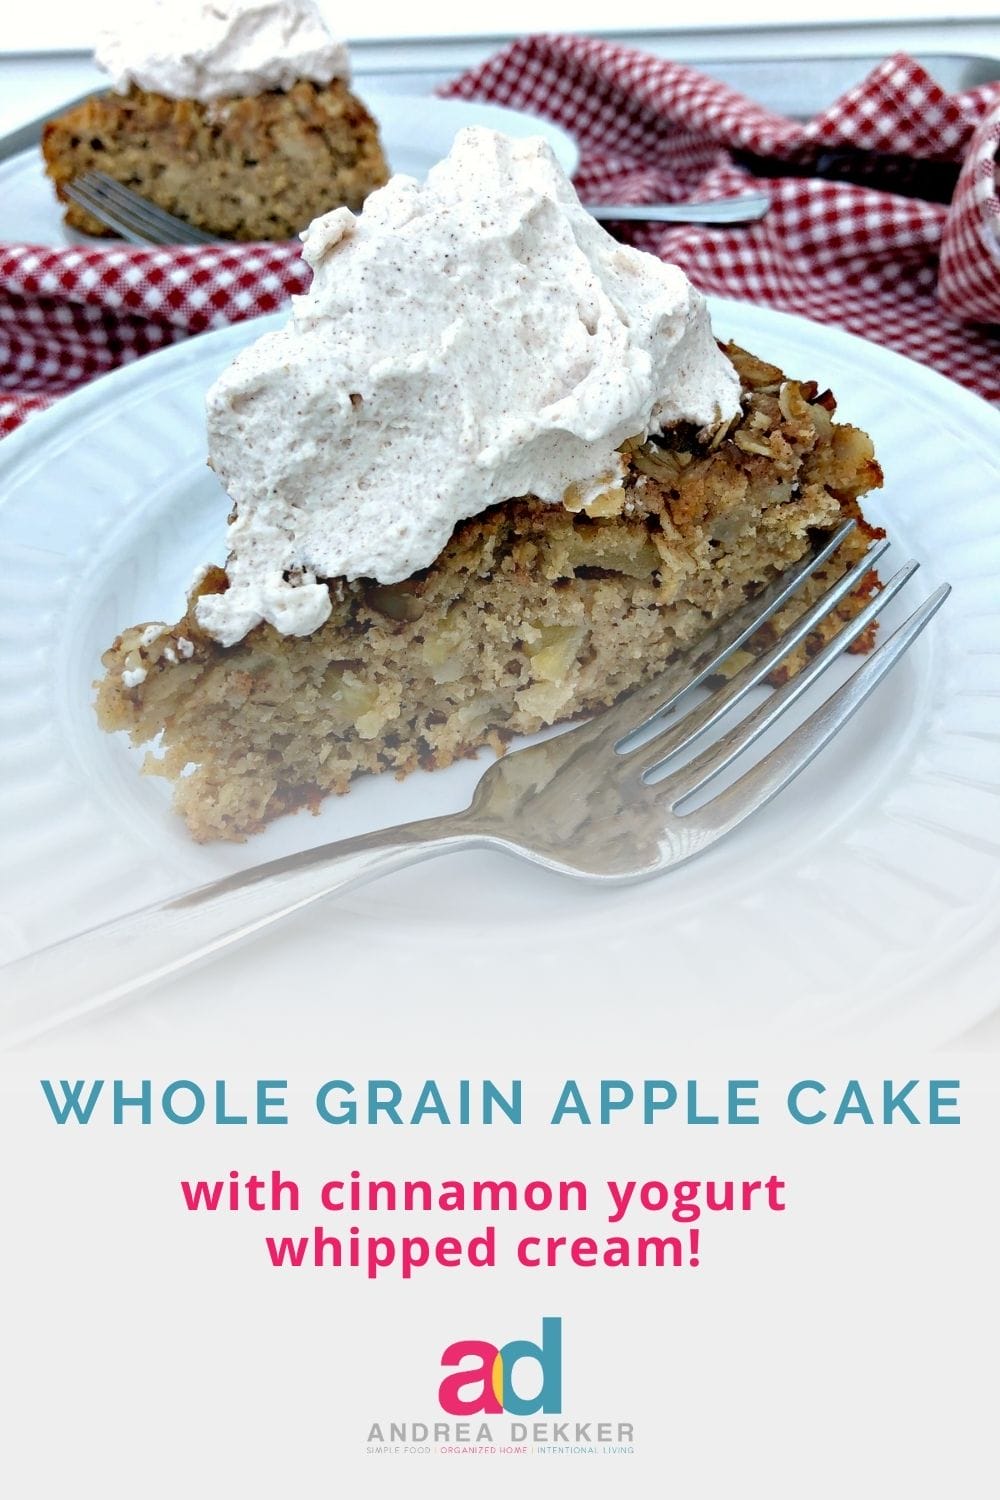 One of my favorite things about Fall is fresh-from-the-orchard apples... especially when I turn those apples into a whole-grain apple cake (with cinnamon yogurt whipped cream)! If you need a new apple recipe for fall, give this one a try. You won't regret it! via @andreadekker